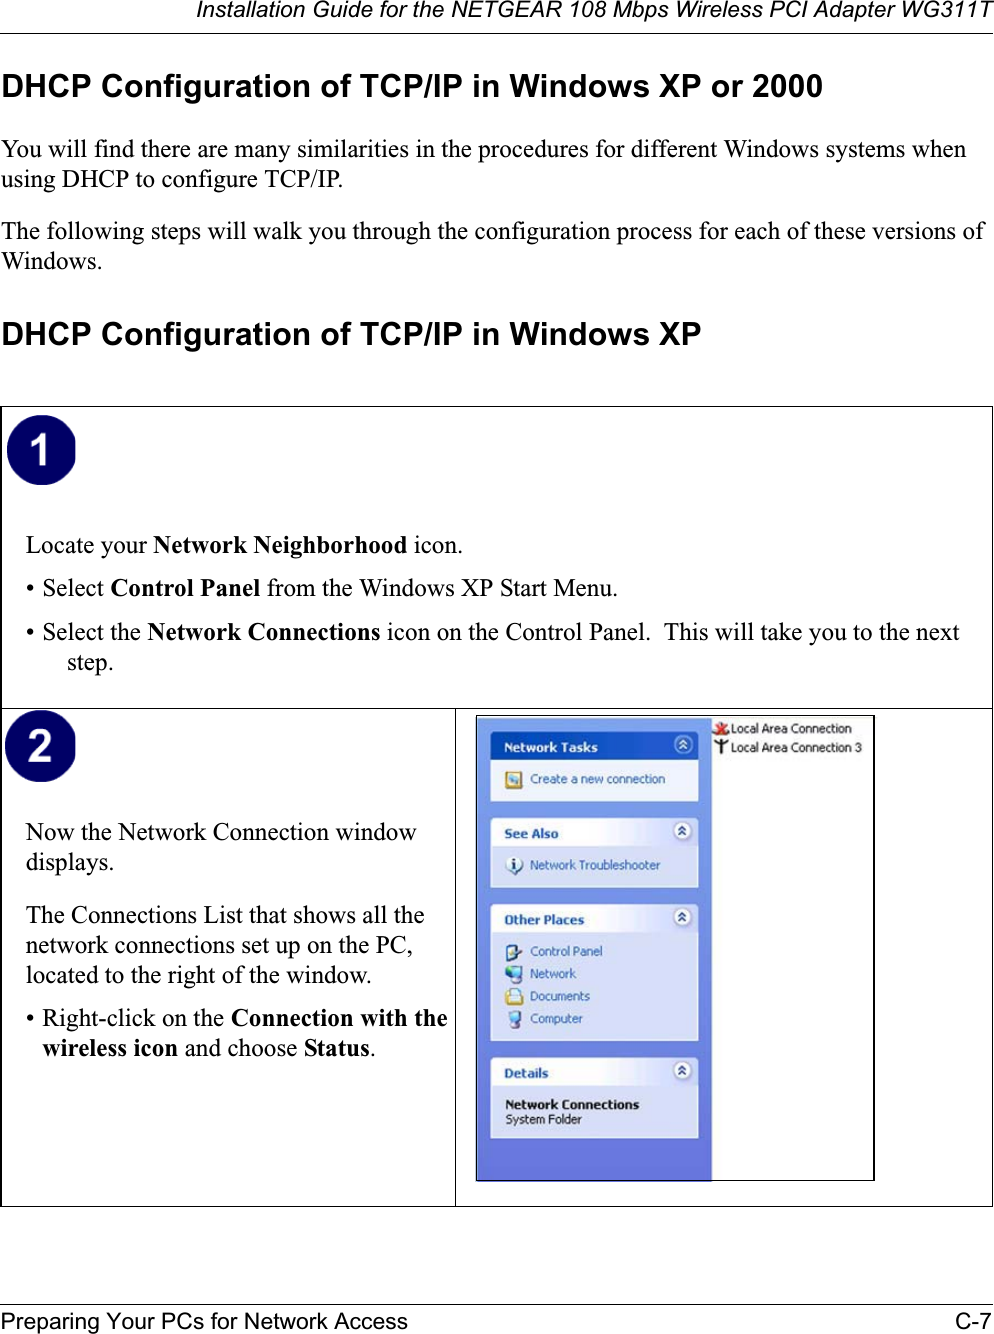 Installation Guide for the NETGEAR 108 Mbps Wireless PCI Adapter WG311TPreparing Your PCs for Network Access C-7DHCP Configuration of TCP/IP in Windows XP or 2000You will find there are many similarities in the procedures for different Windows systems when using DHCP to configure TCP/IP.The following steps will walk you through the configuration process for each of these versions of Windows.DHCP Configuration of TCP/IP in Windows XP Locate your Network Neighborhood icon.• Select Control Panel from the Windows XP Start Menu.• Select the Network Connections icon on the Control Panel.  This will take you to the next step.Now the Network Connection window displays.The Connections List that shows all the network connections set up on the PC, located to the right of the window.• Right-click on the Connection with the wireless icon and choose Status.